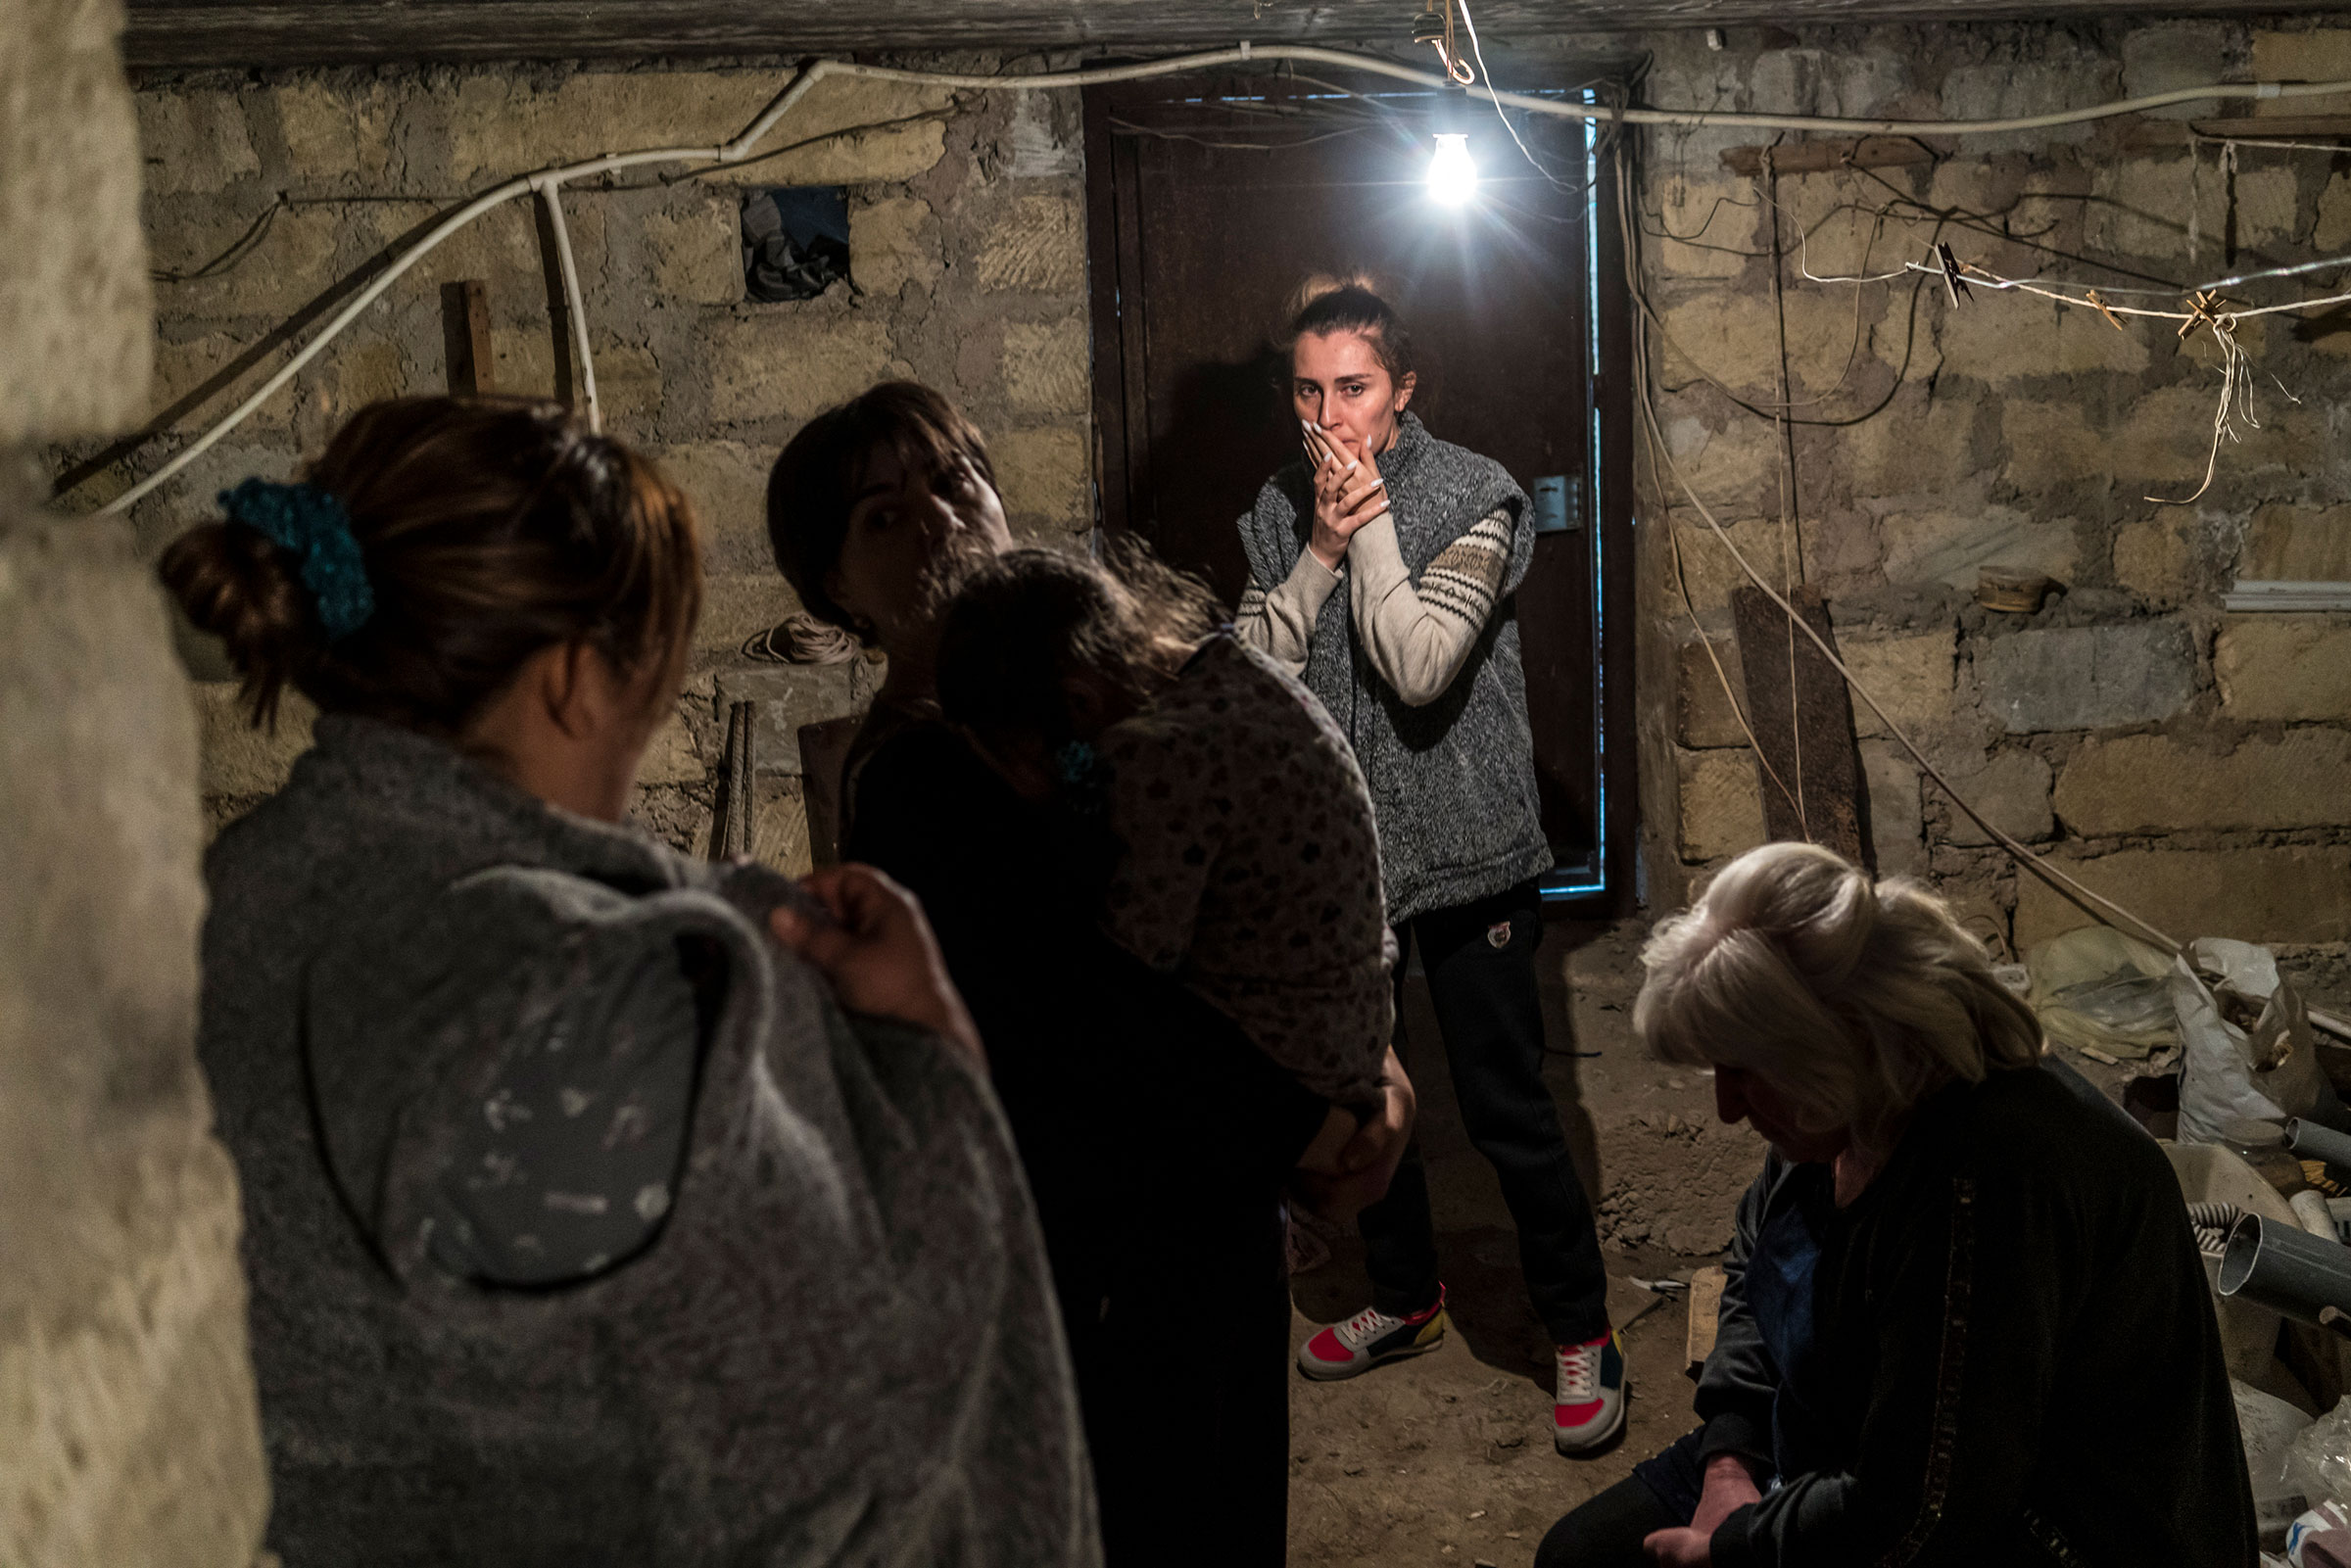 Residents shelter in a basement as air raid sirens sound on Sept. 29, 2020 in Stepanakert, Nagorno-Karabakh